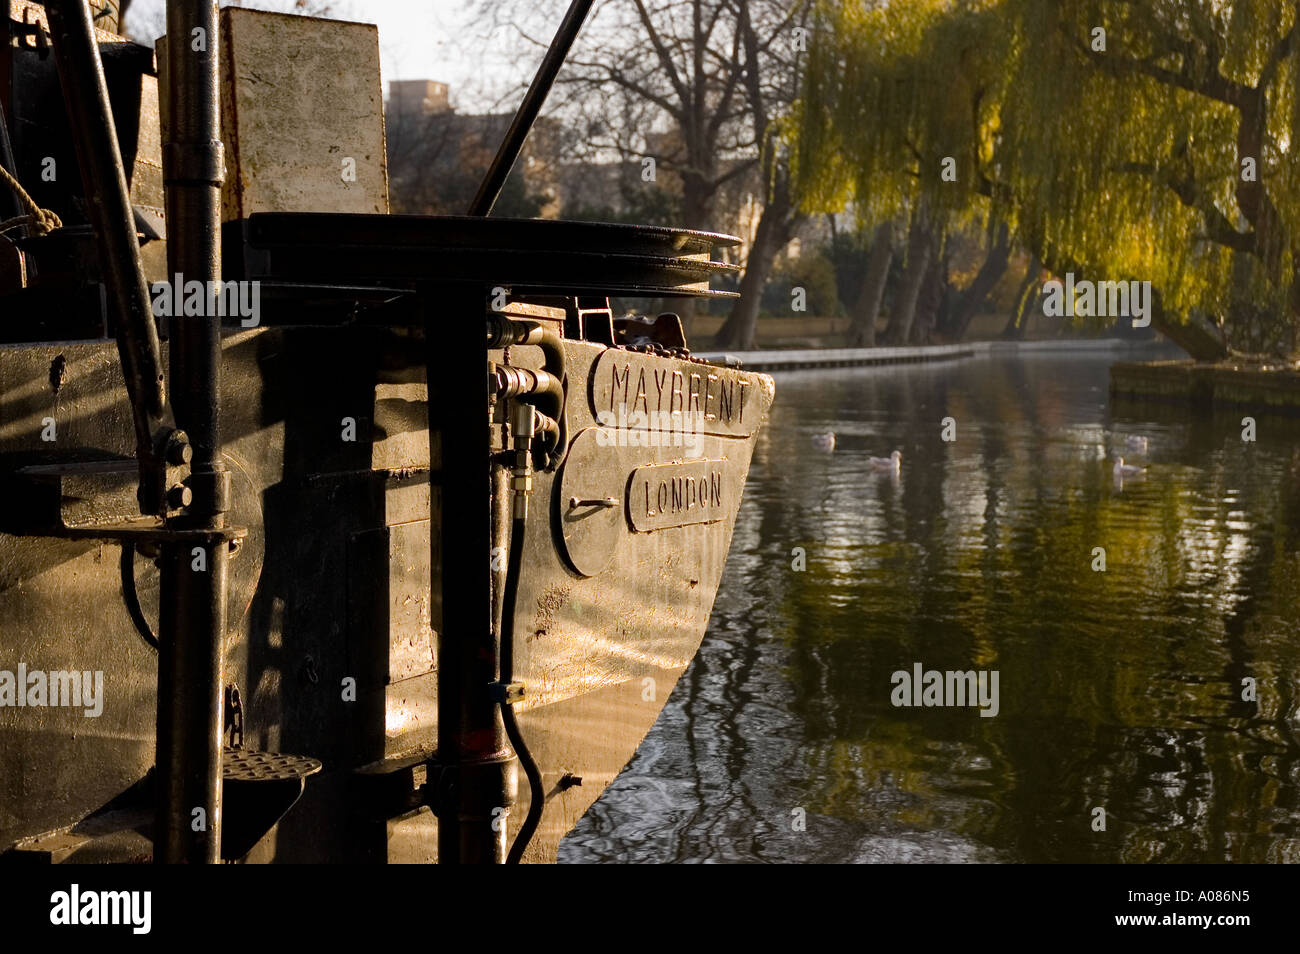 Barge at Little Venice, London Stock Photo